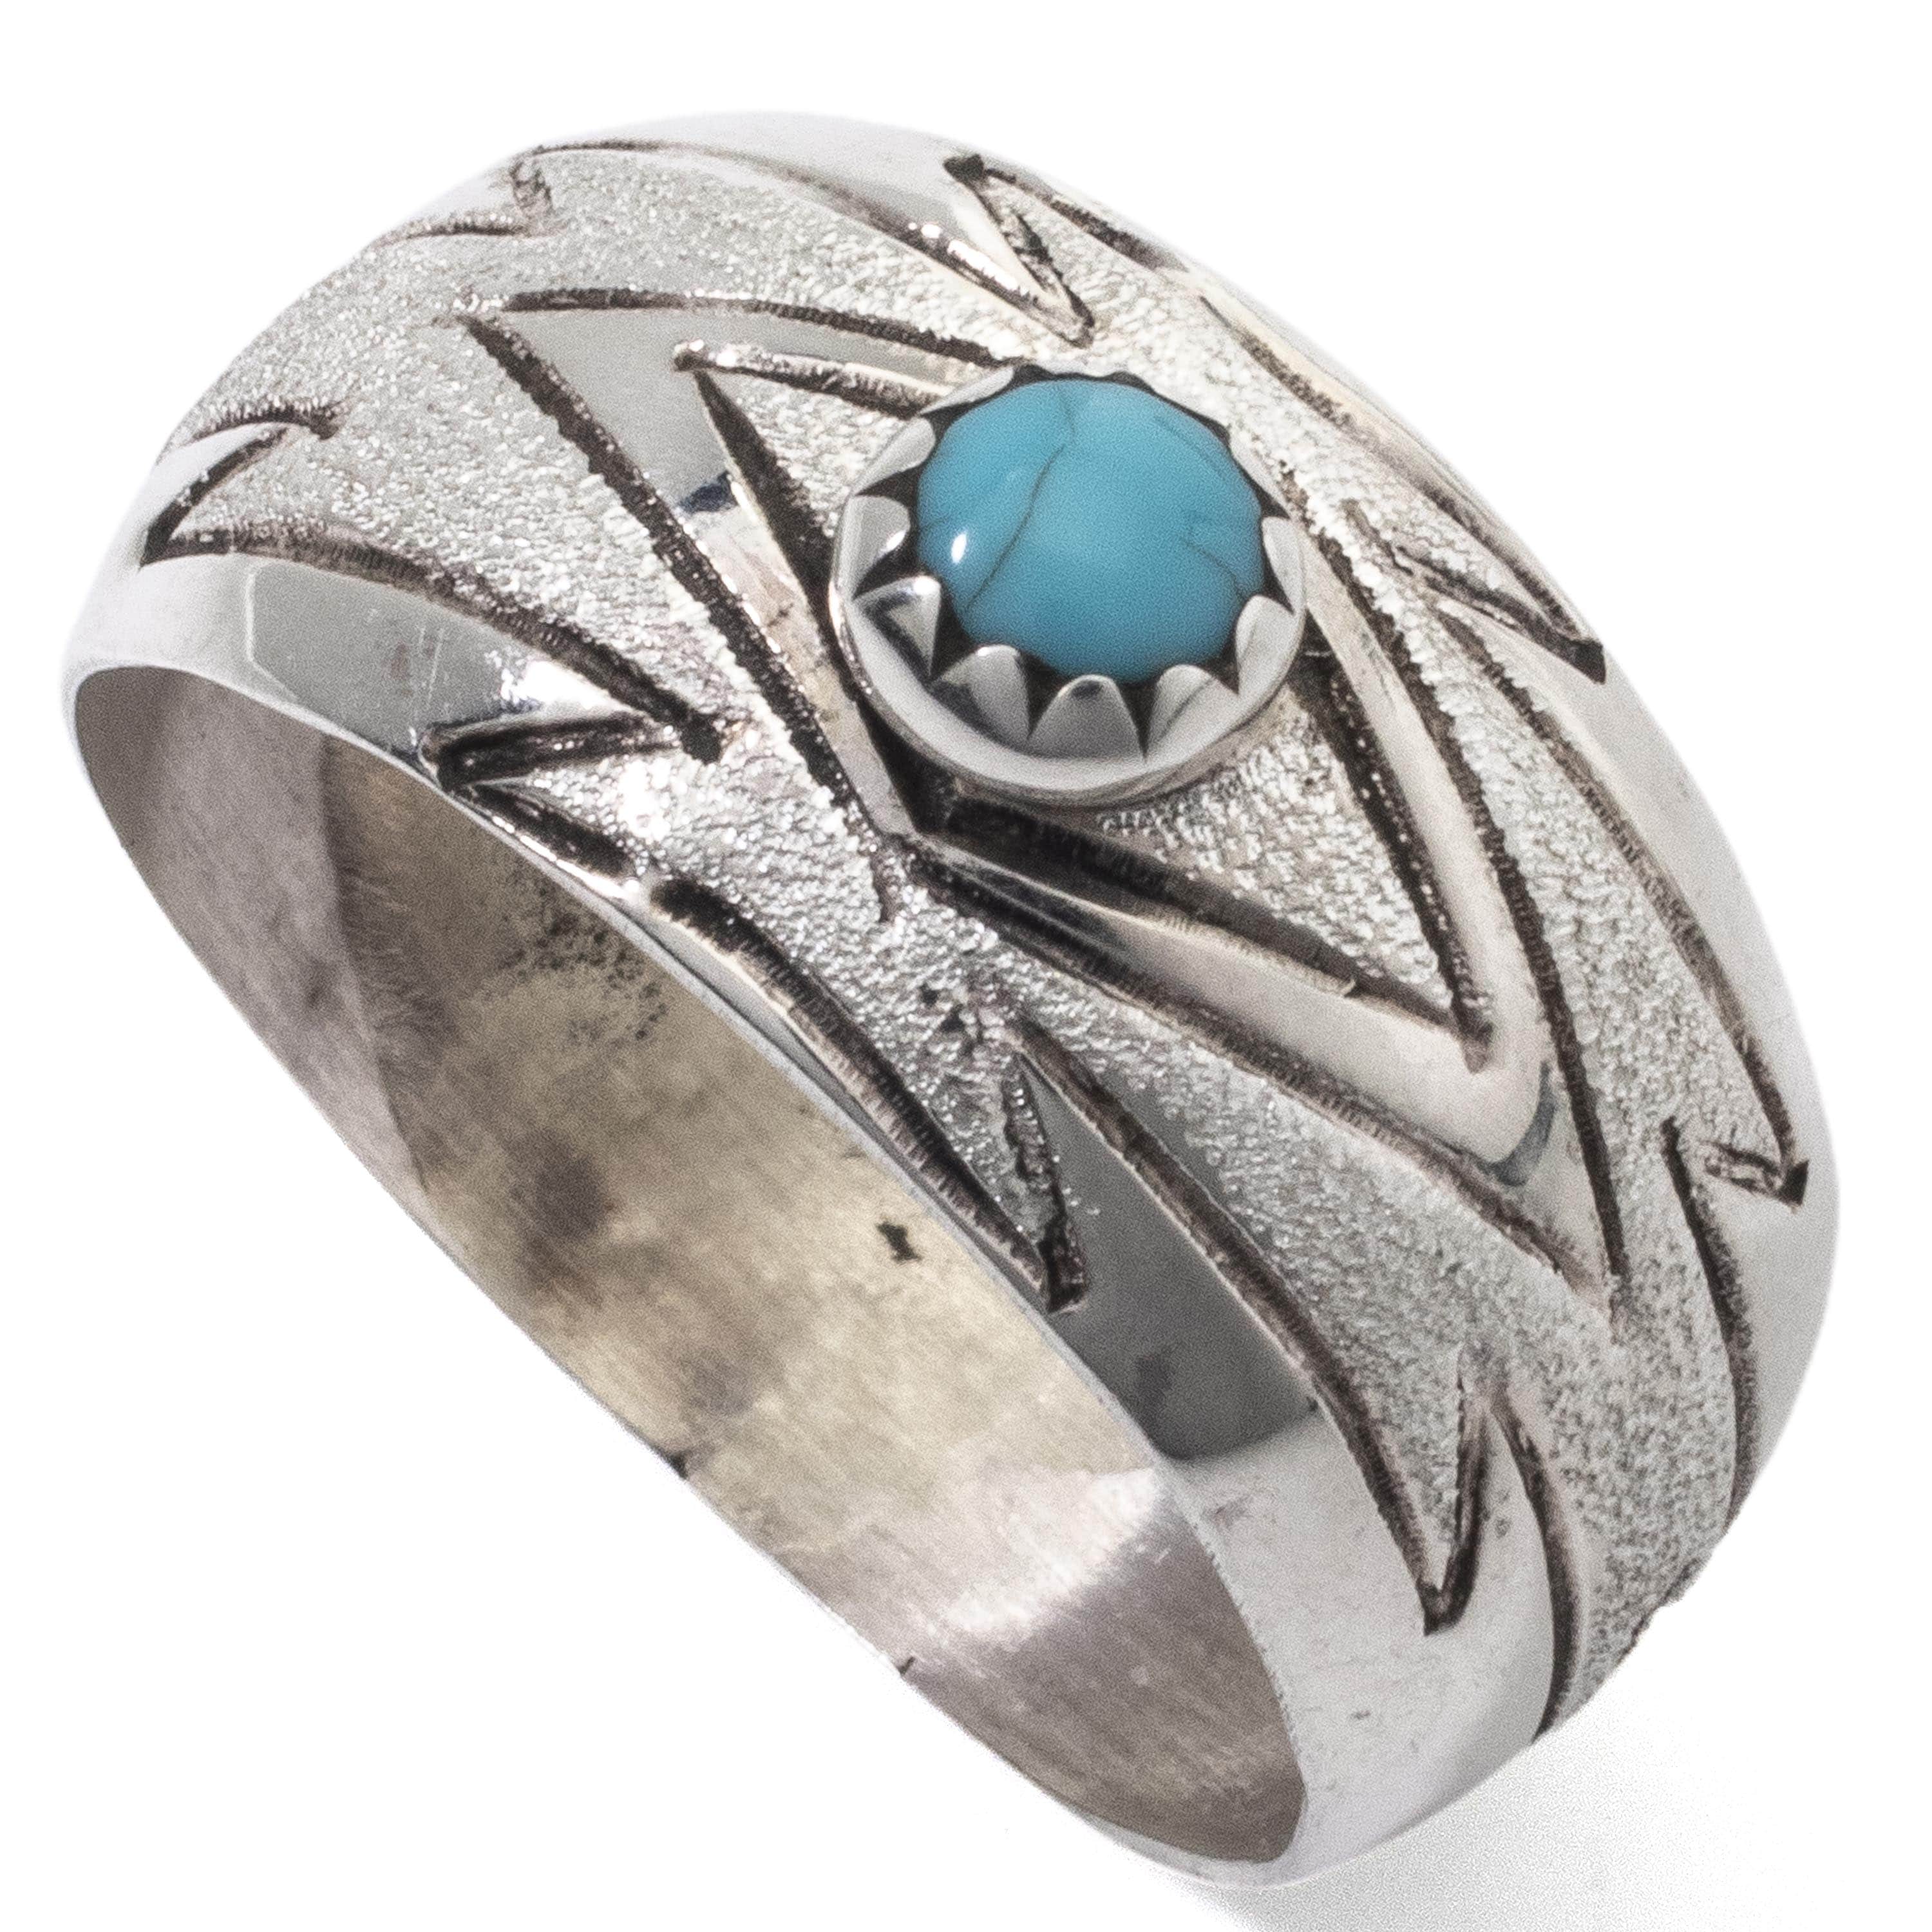 Kalifano Native American Jewelry Florence Tahe Navajo Kingman Turquoise USA Native American Made 925 Sterling Silver Ring